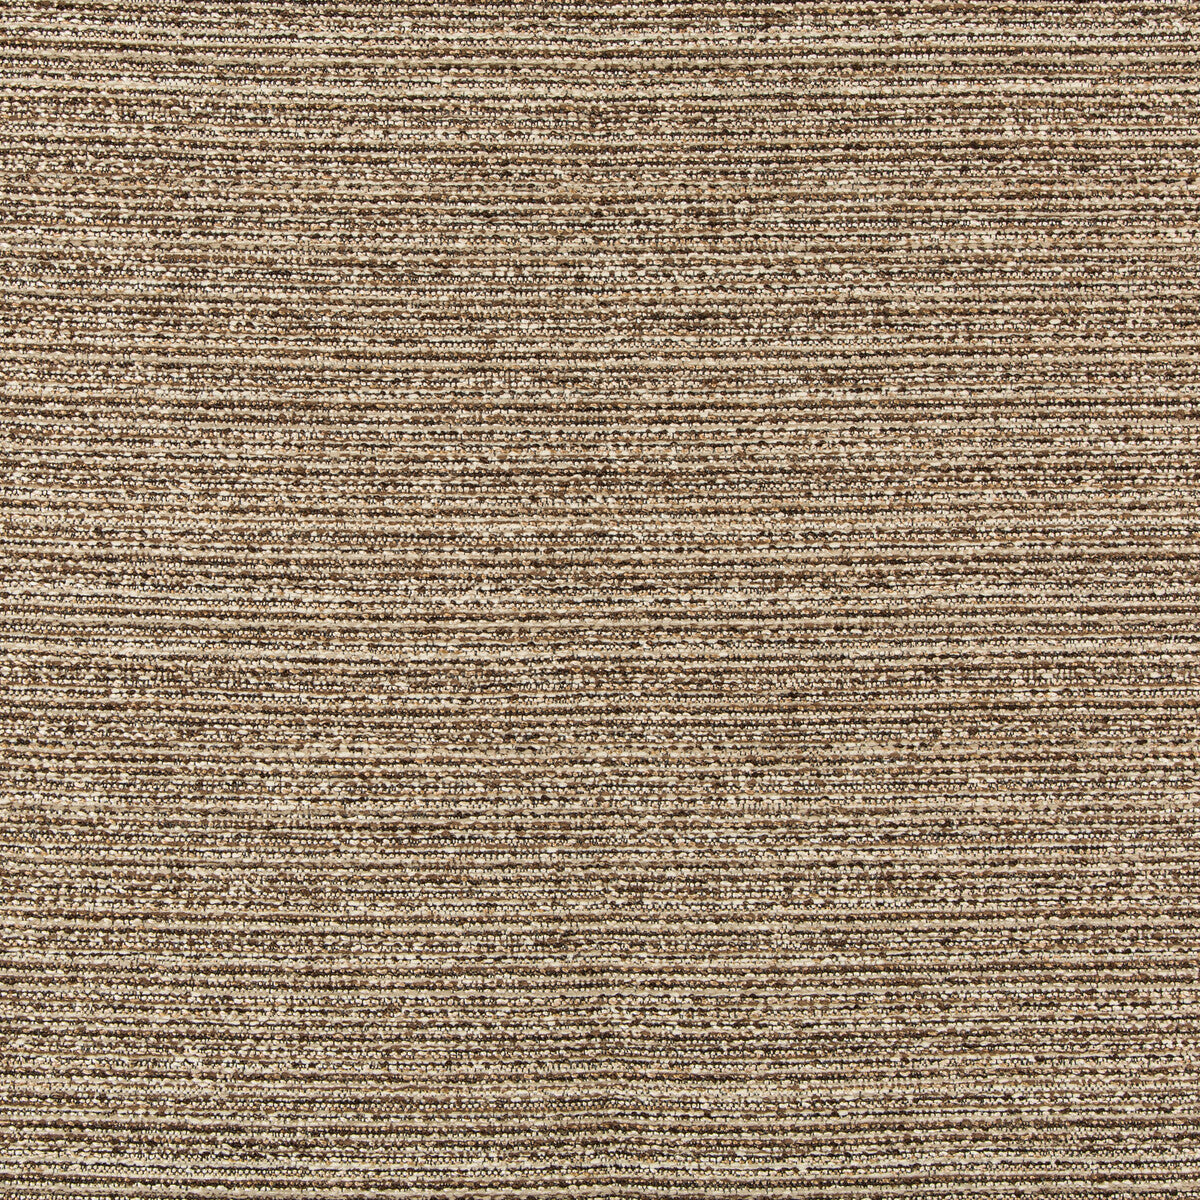 Kravet Design fabric in 36079-61 color - pattern 36079.61.0 - by Kravet Design in the Inside Out Performance Fabrics collection